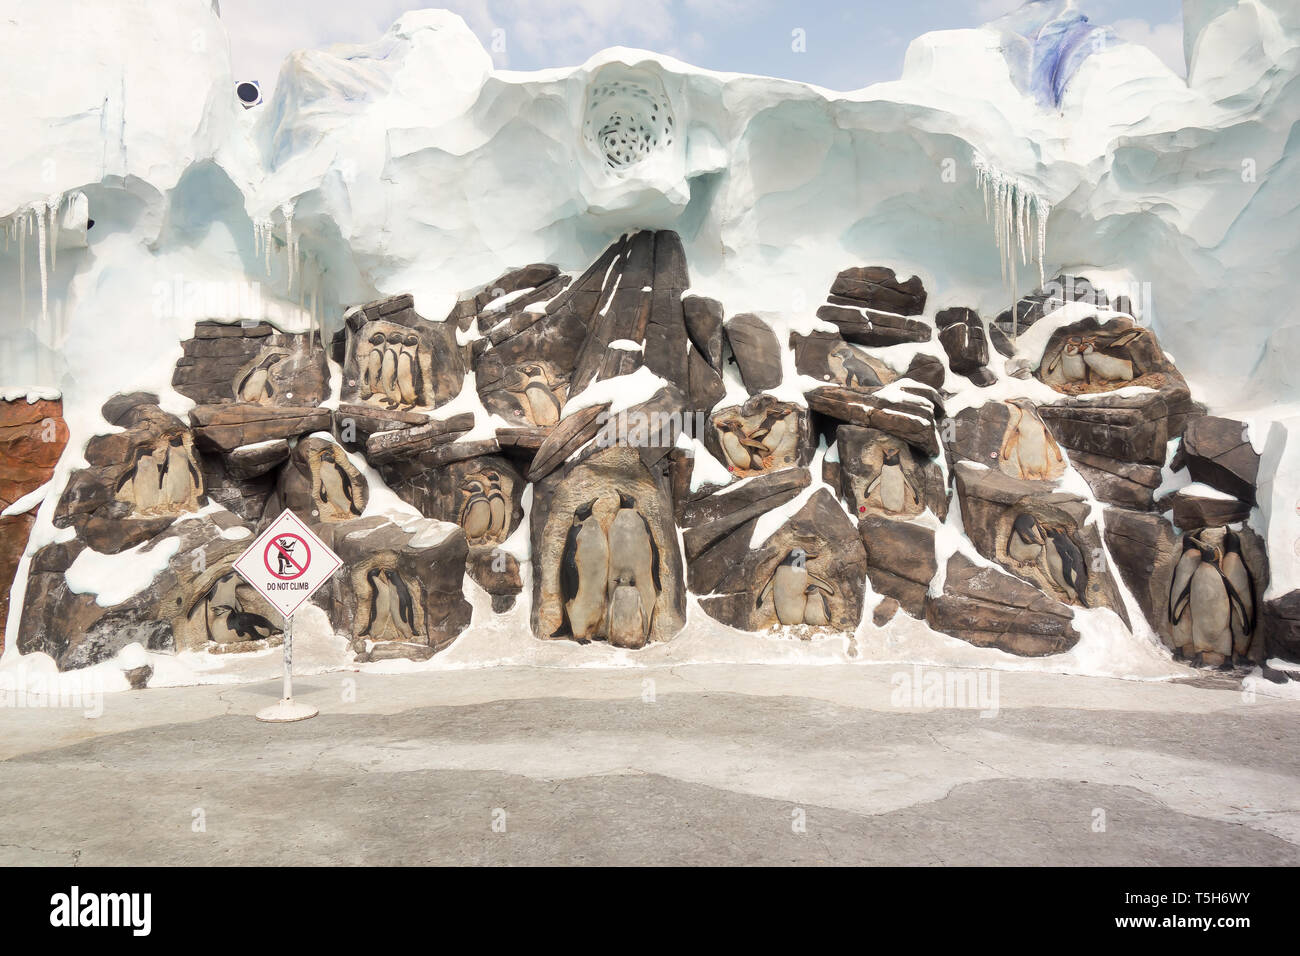 Creative artwork of penguins that has been curved into rocks as a welcome sign to tourists who visit the Antarctica: Empire of the Penguin at Seaworld Stock Photo